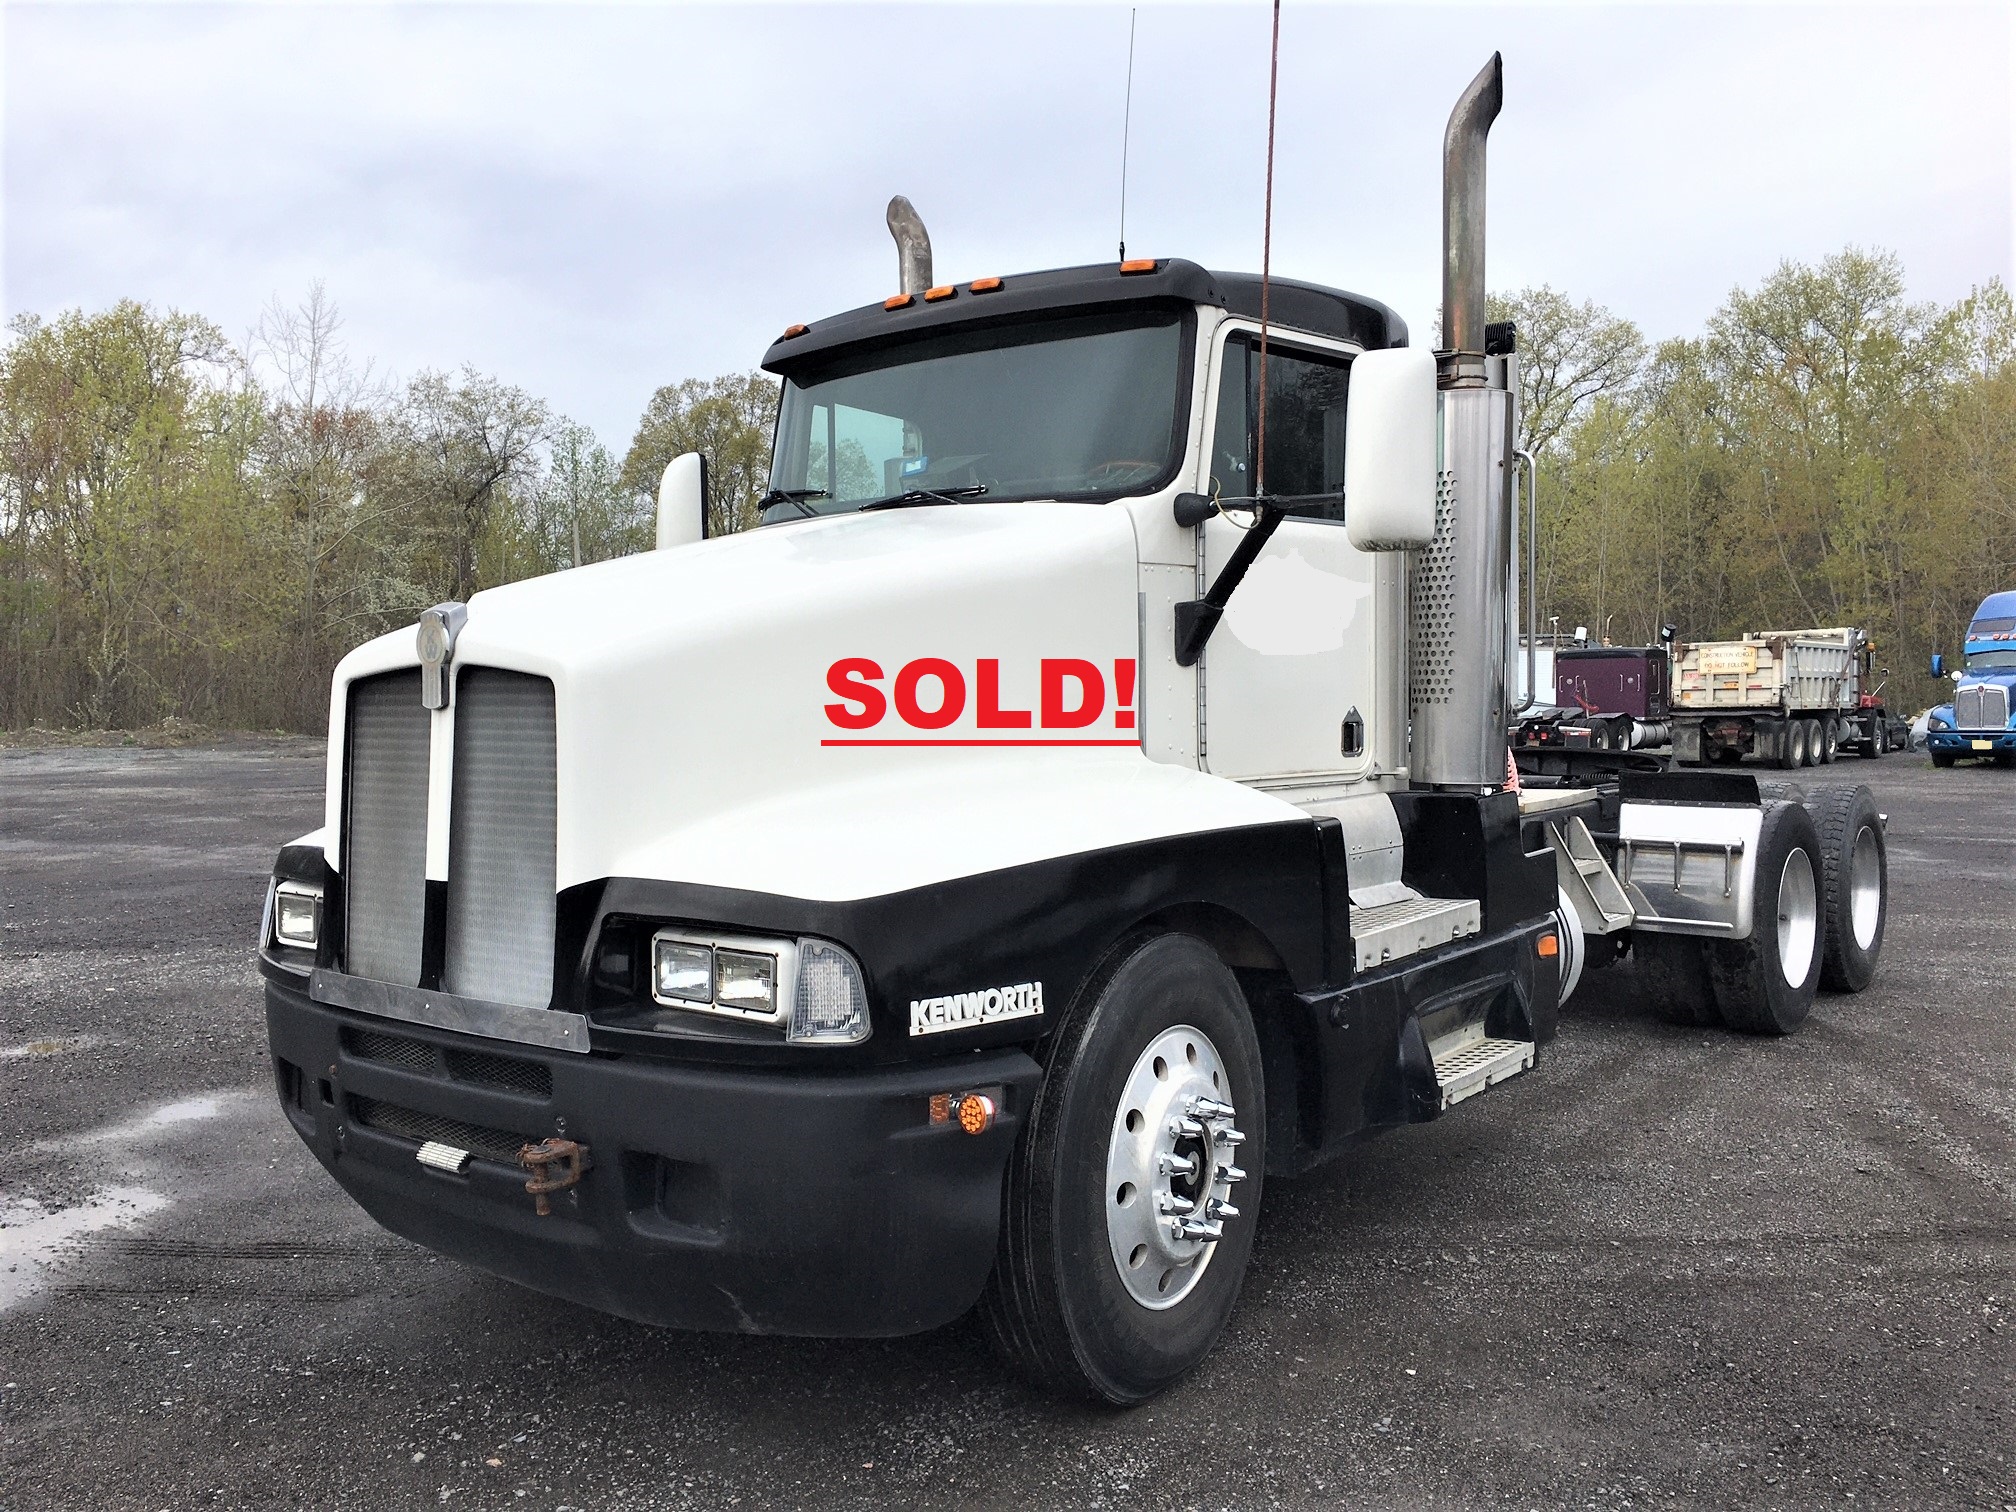 Kenworth T600 Semi Truck. 1994 conventional day cab. Caterpillar 3406C 425 horsepower diesel engine with 968563 frame miles. 168'563 miles on in house in frame rebuild. Eaton Fuller Roadranger super 10 transmission. 370/44K rears with differential lock, 260 inch wheelbase. (8) airbag-air ride suspension with 12k fronts. Aluminum bud wheels and 11/24 tires. East aluminum bulkhead with backup/work area lighting. Three stage engine brake, cruise control, mirror heat, AC equipped-needs a charge. Air ride drivers seat.